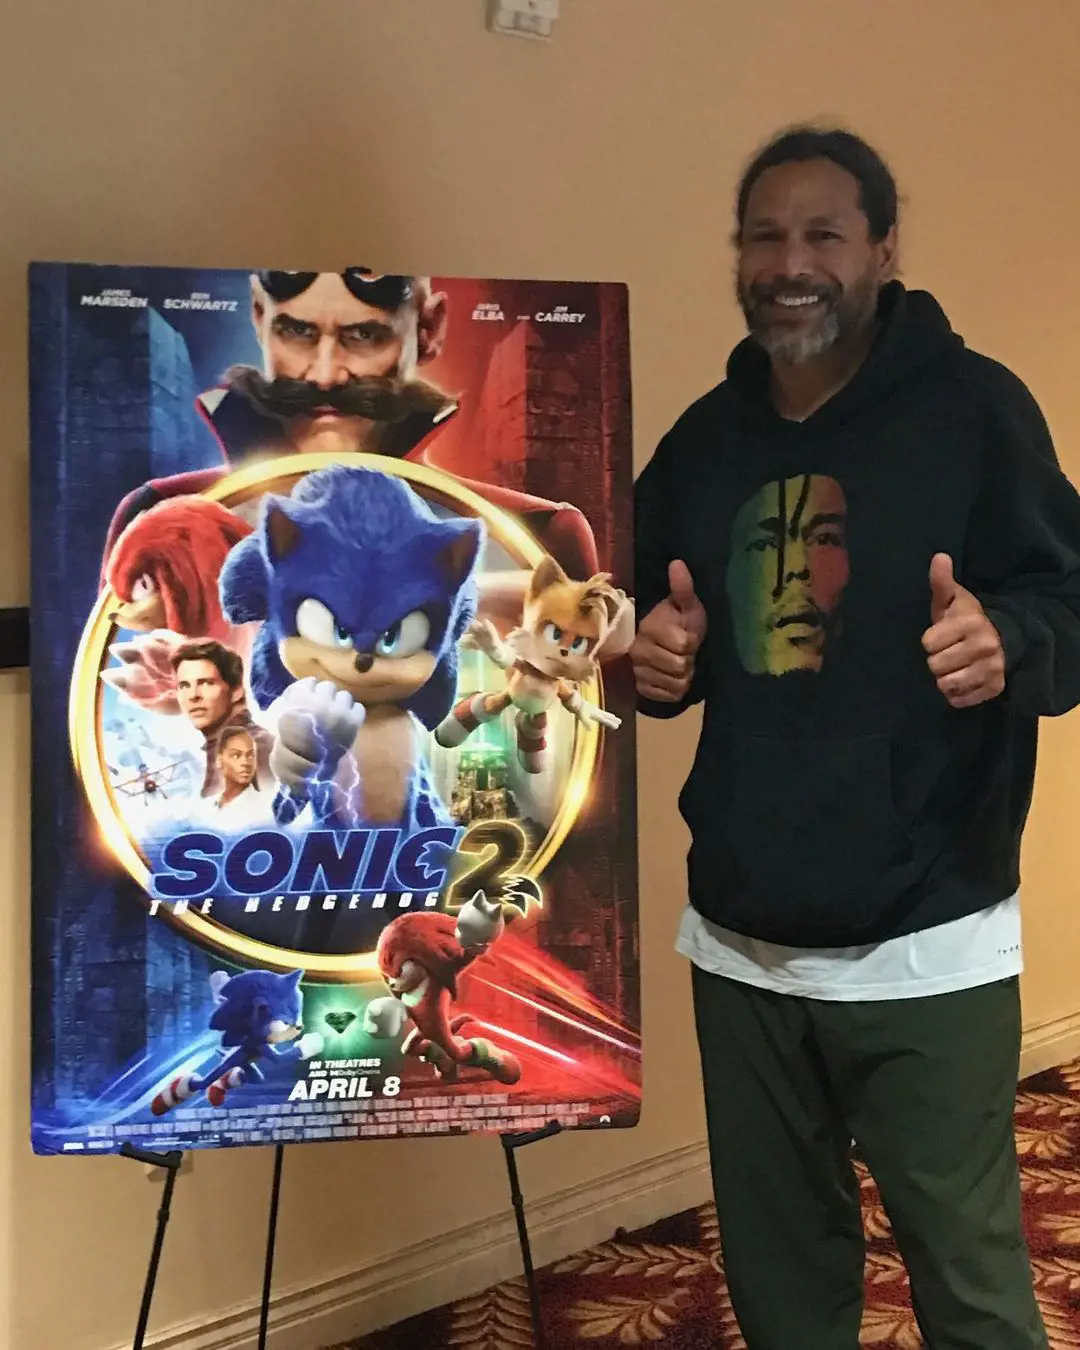 Troy had a great time with his friend to be in the theaters to watch Sonice the Hedgehog 2 movie on April 3, 2022.